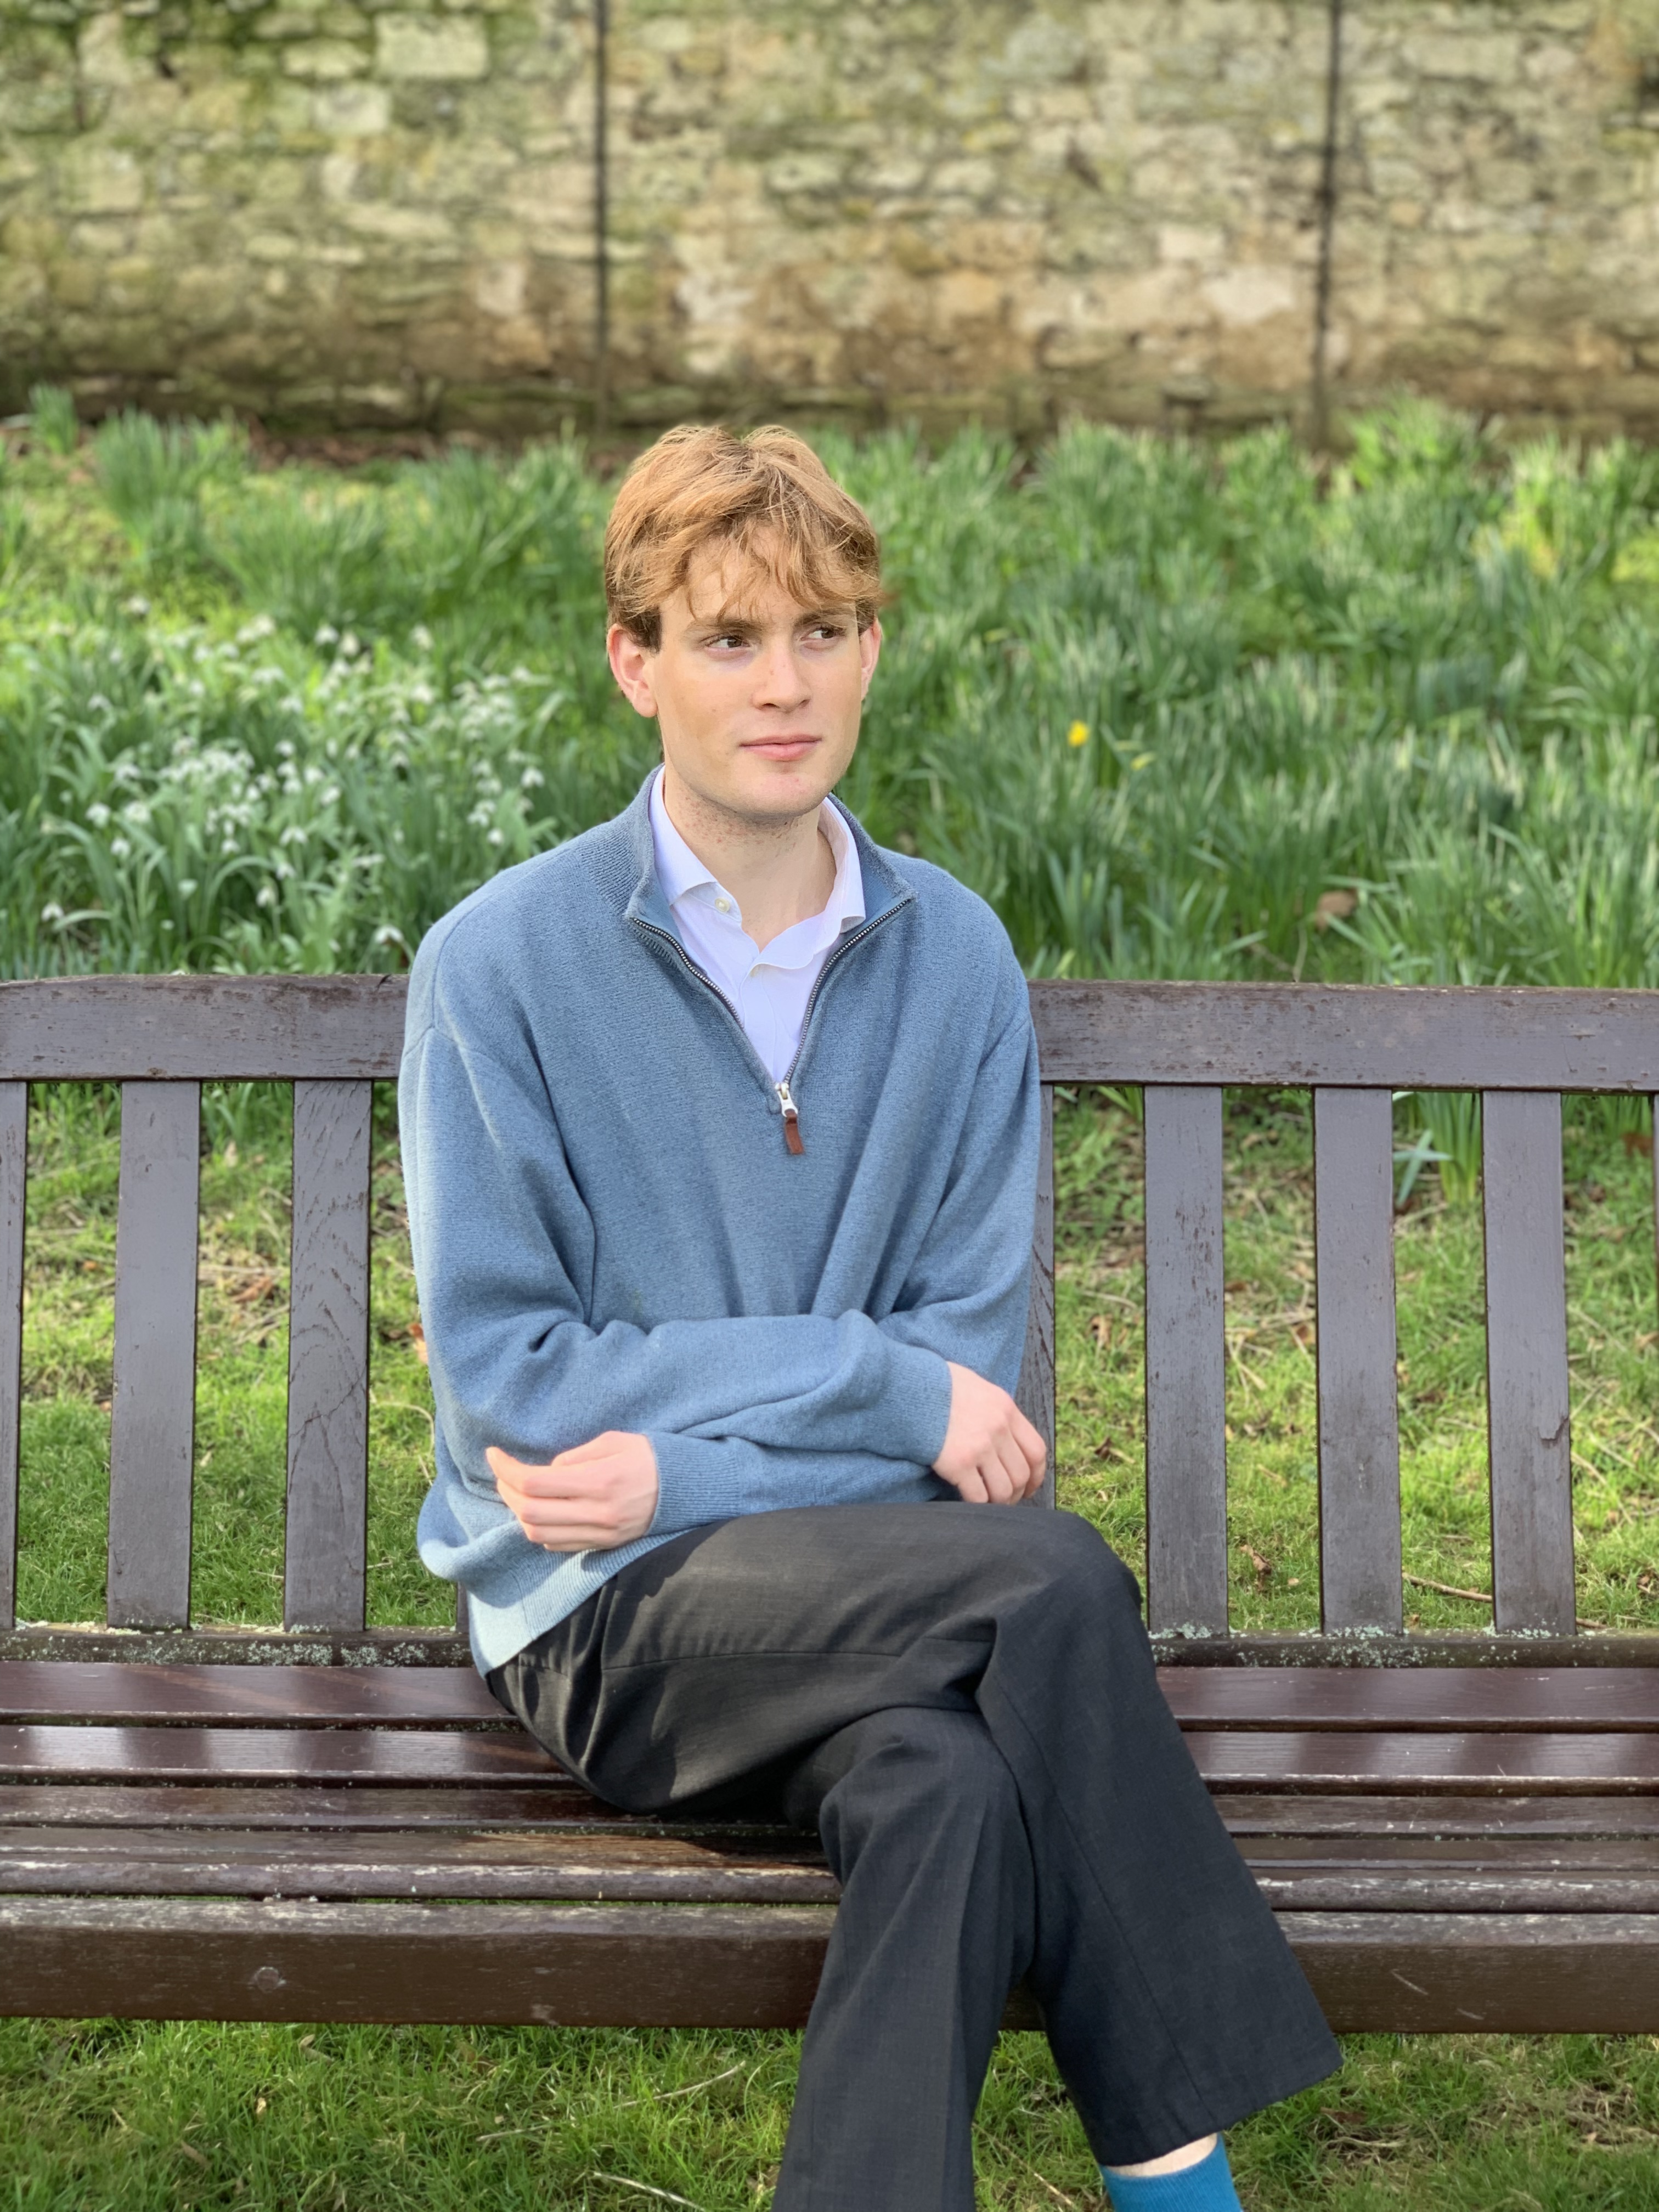 Patrick sitting on a bench in New College gardens